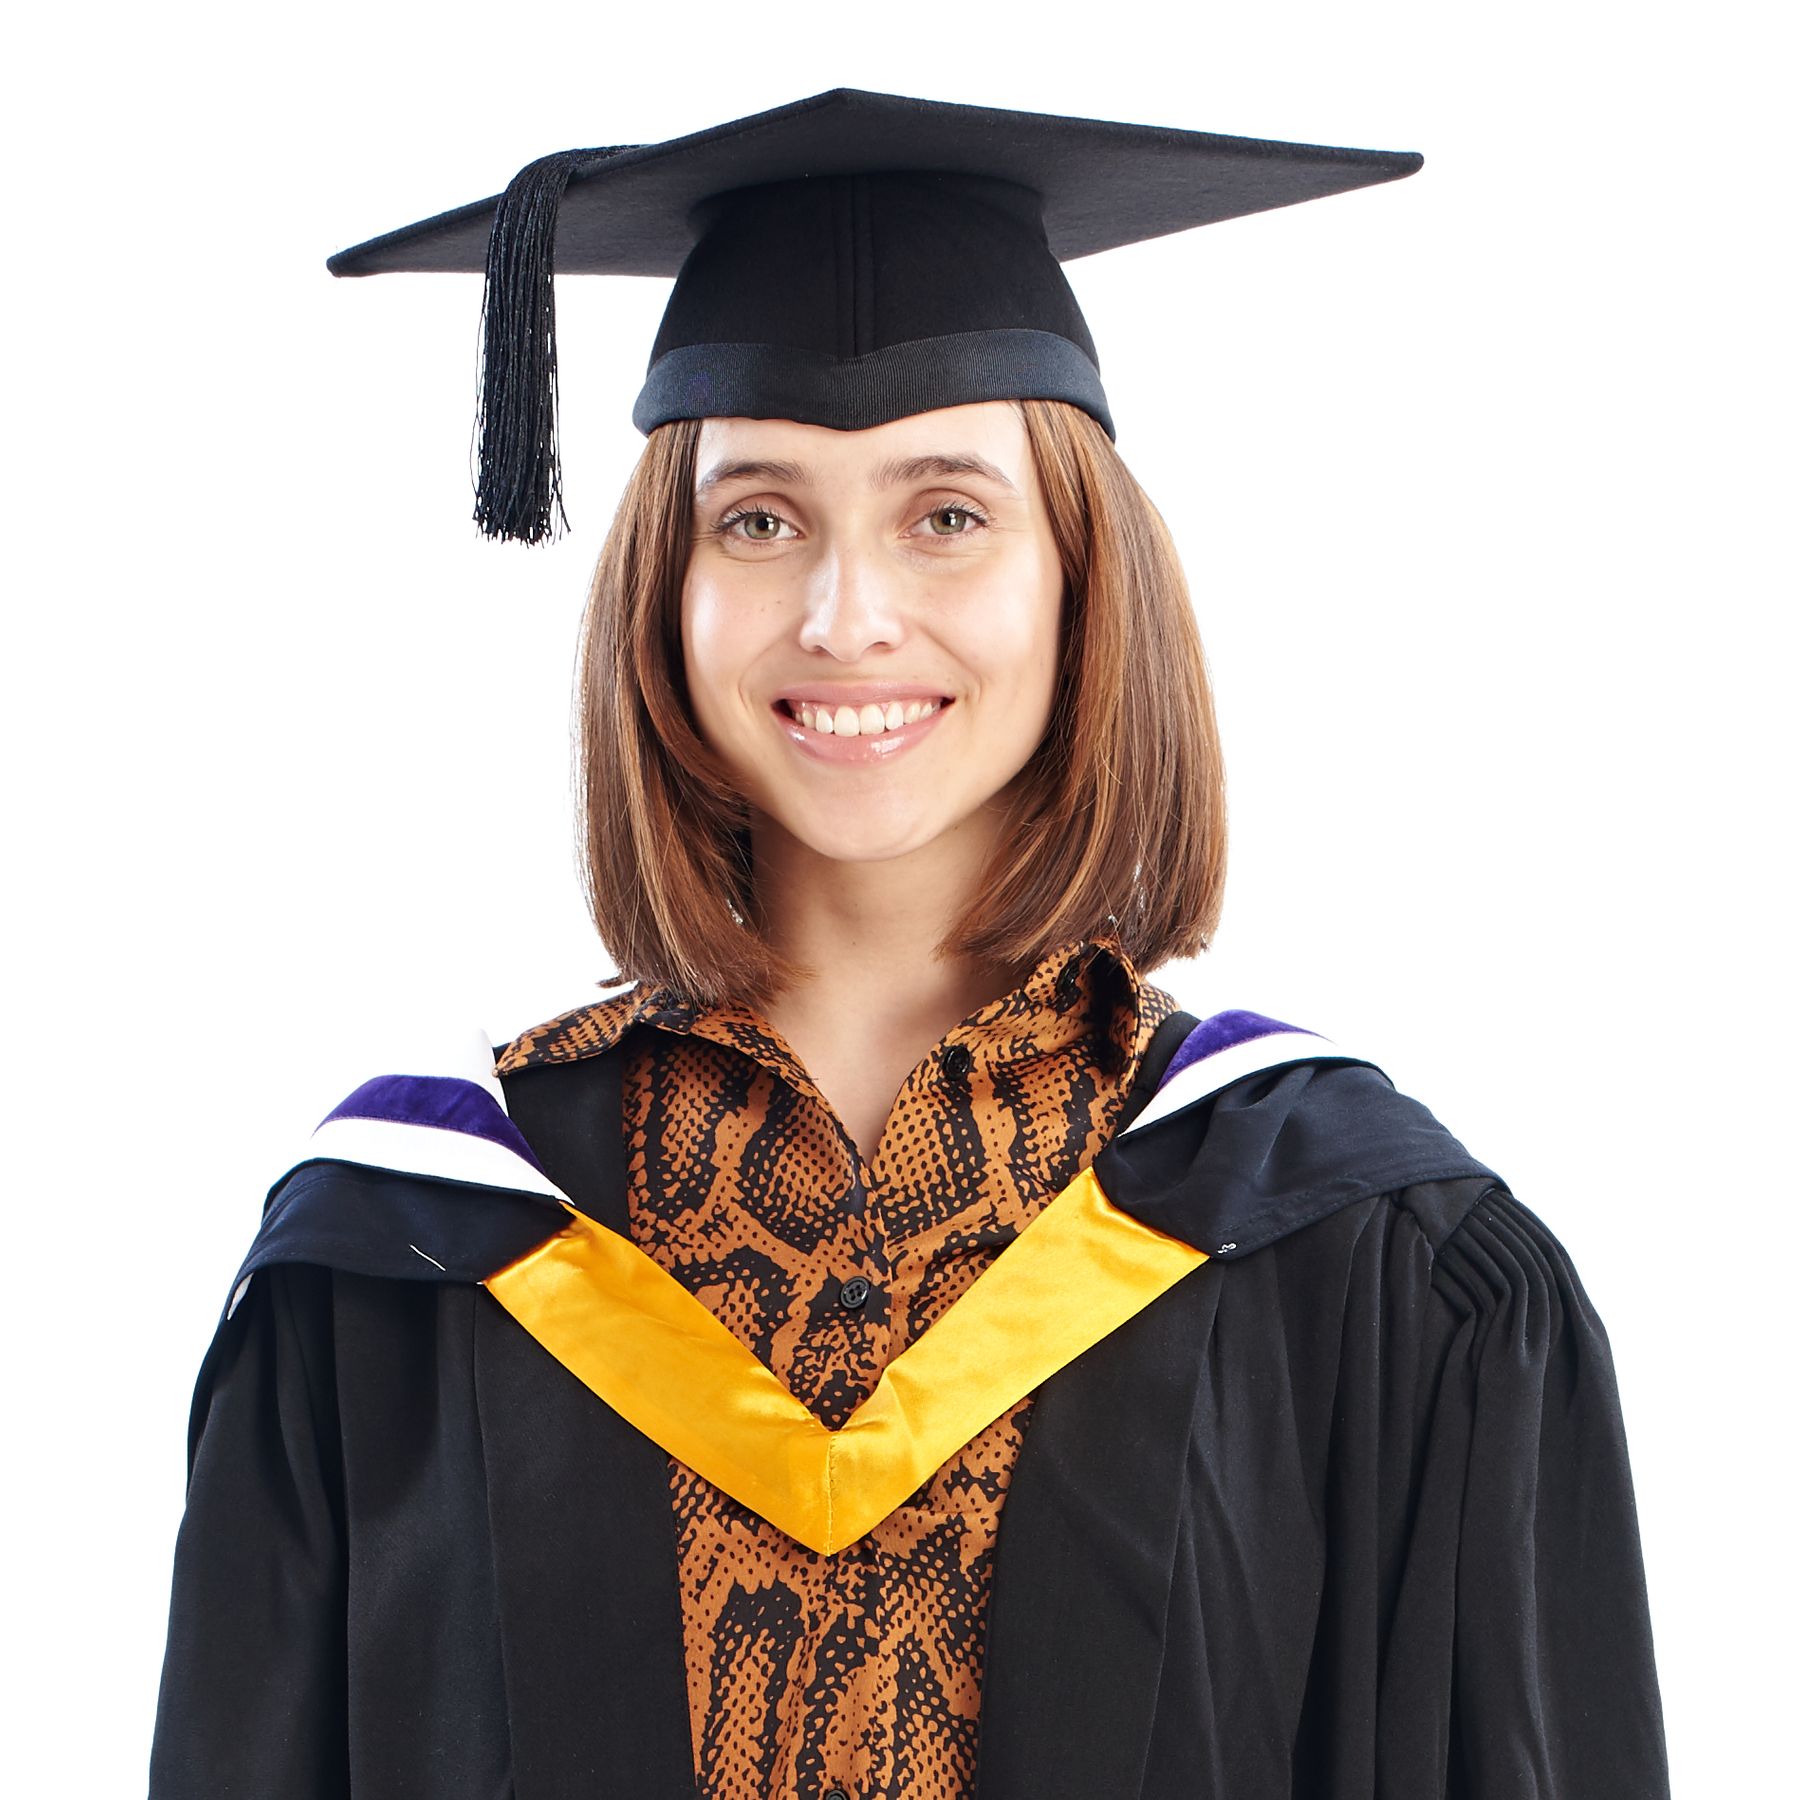 1,135 Graduation Gown Photos, Pictures And Background Images For Free  Download - Pngtree